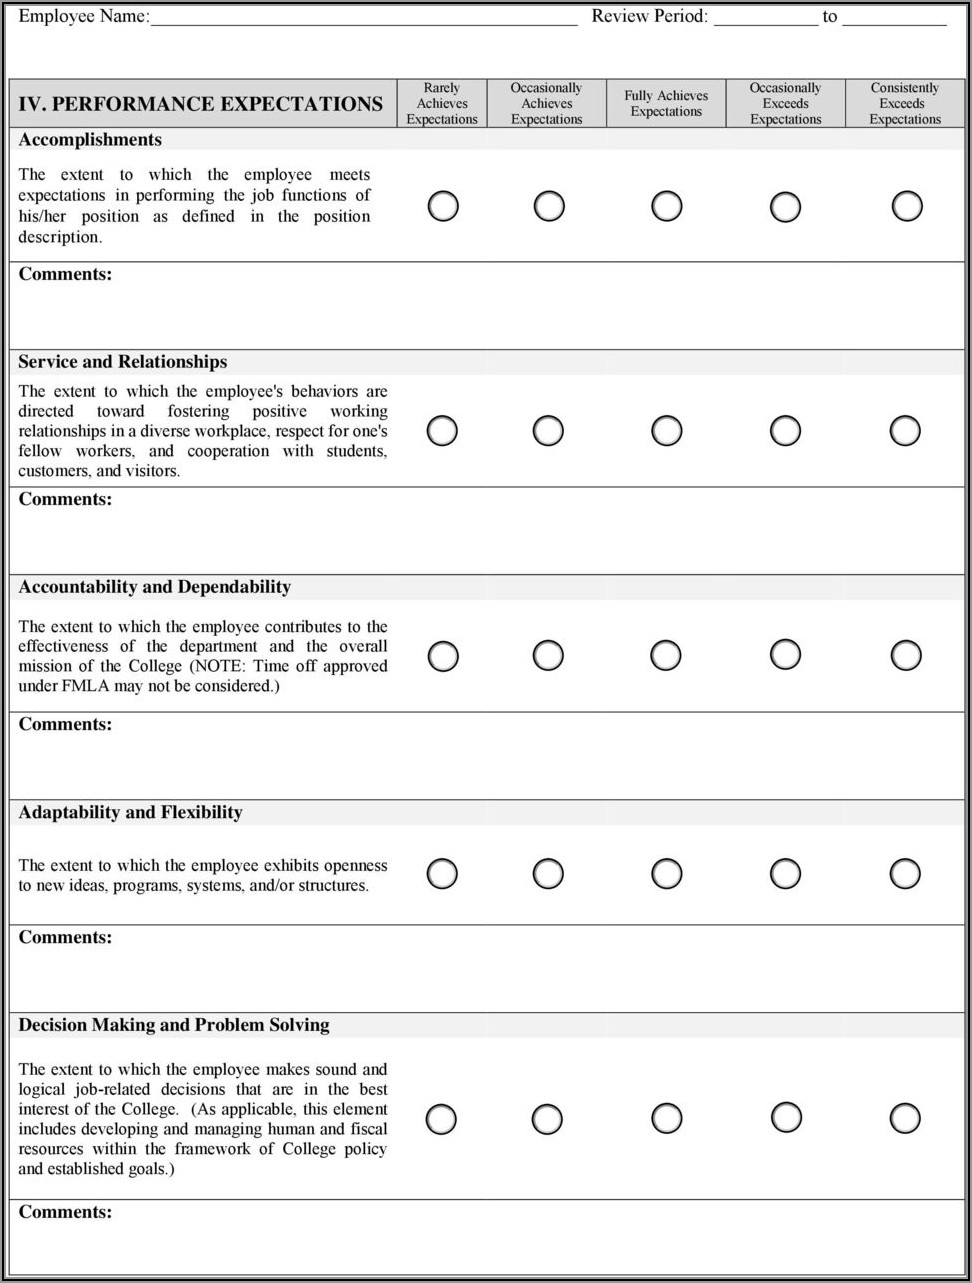 Free Employee Performance Review Form Pdf